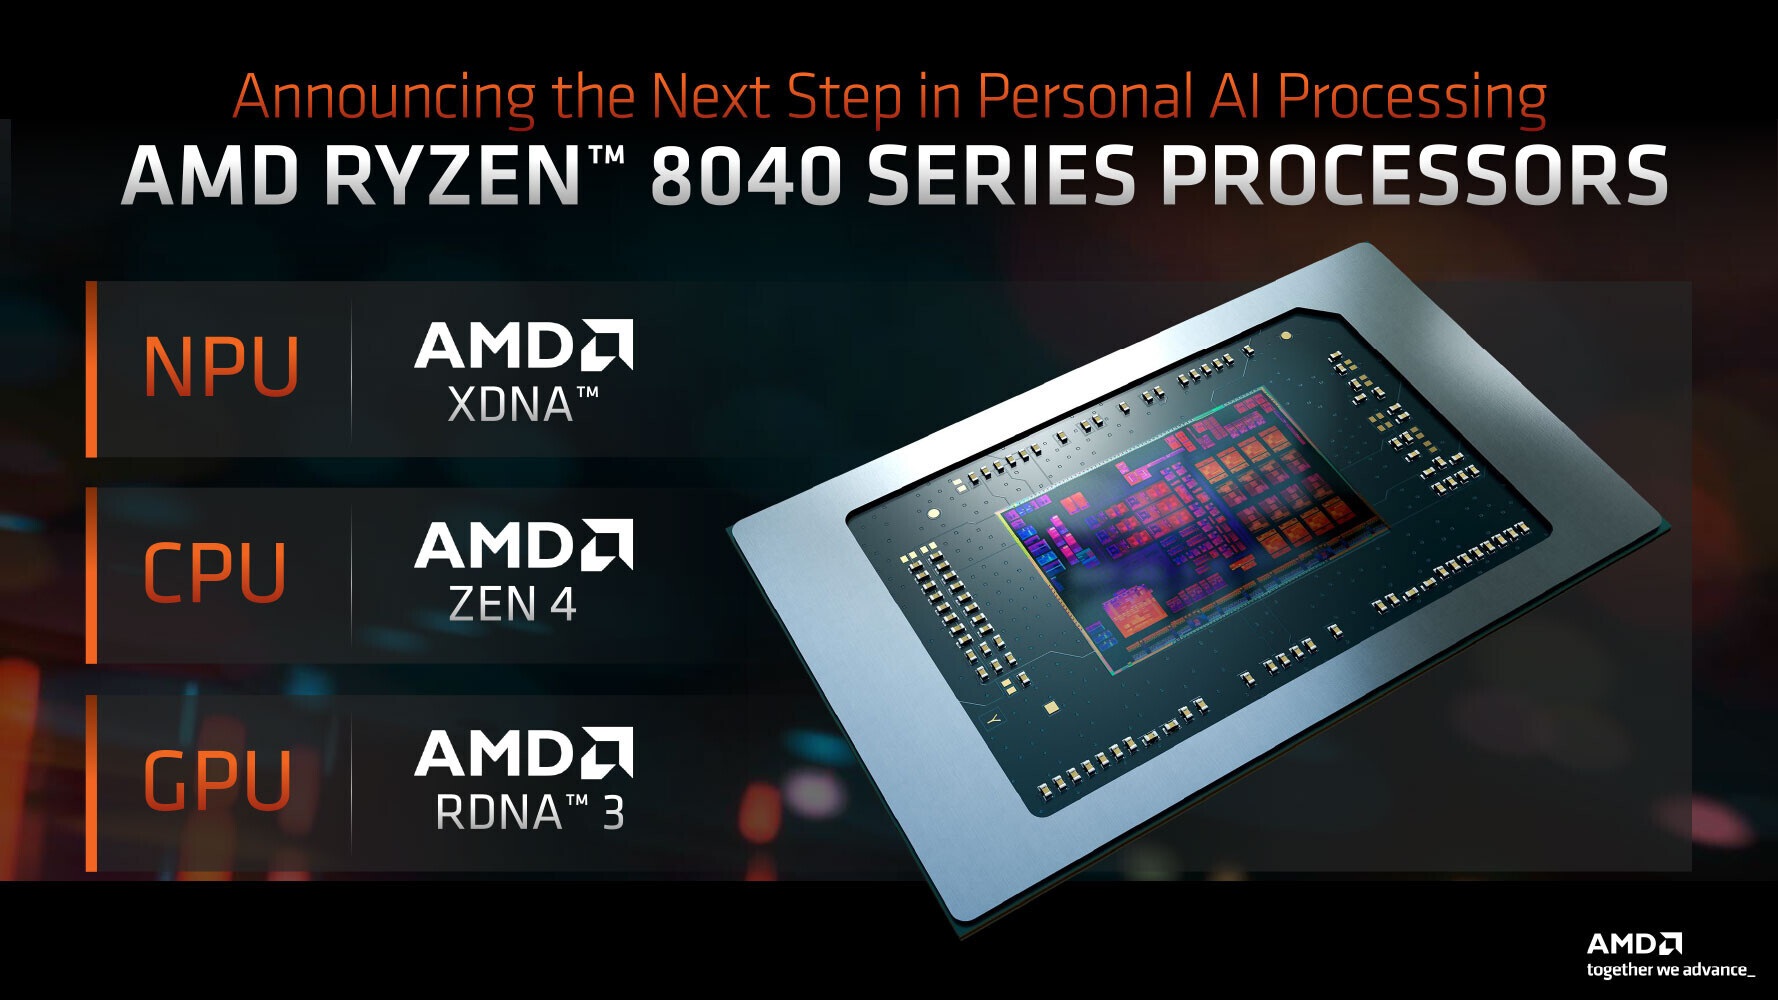 AMD boosts AI performance with new Ryzen 8040 Hawk Point CPUs